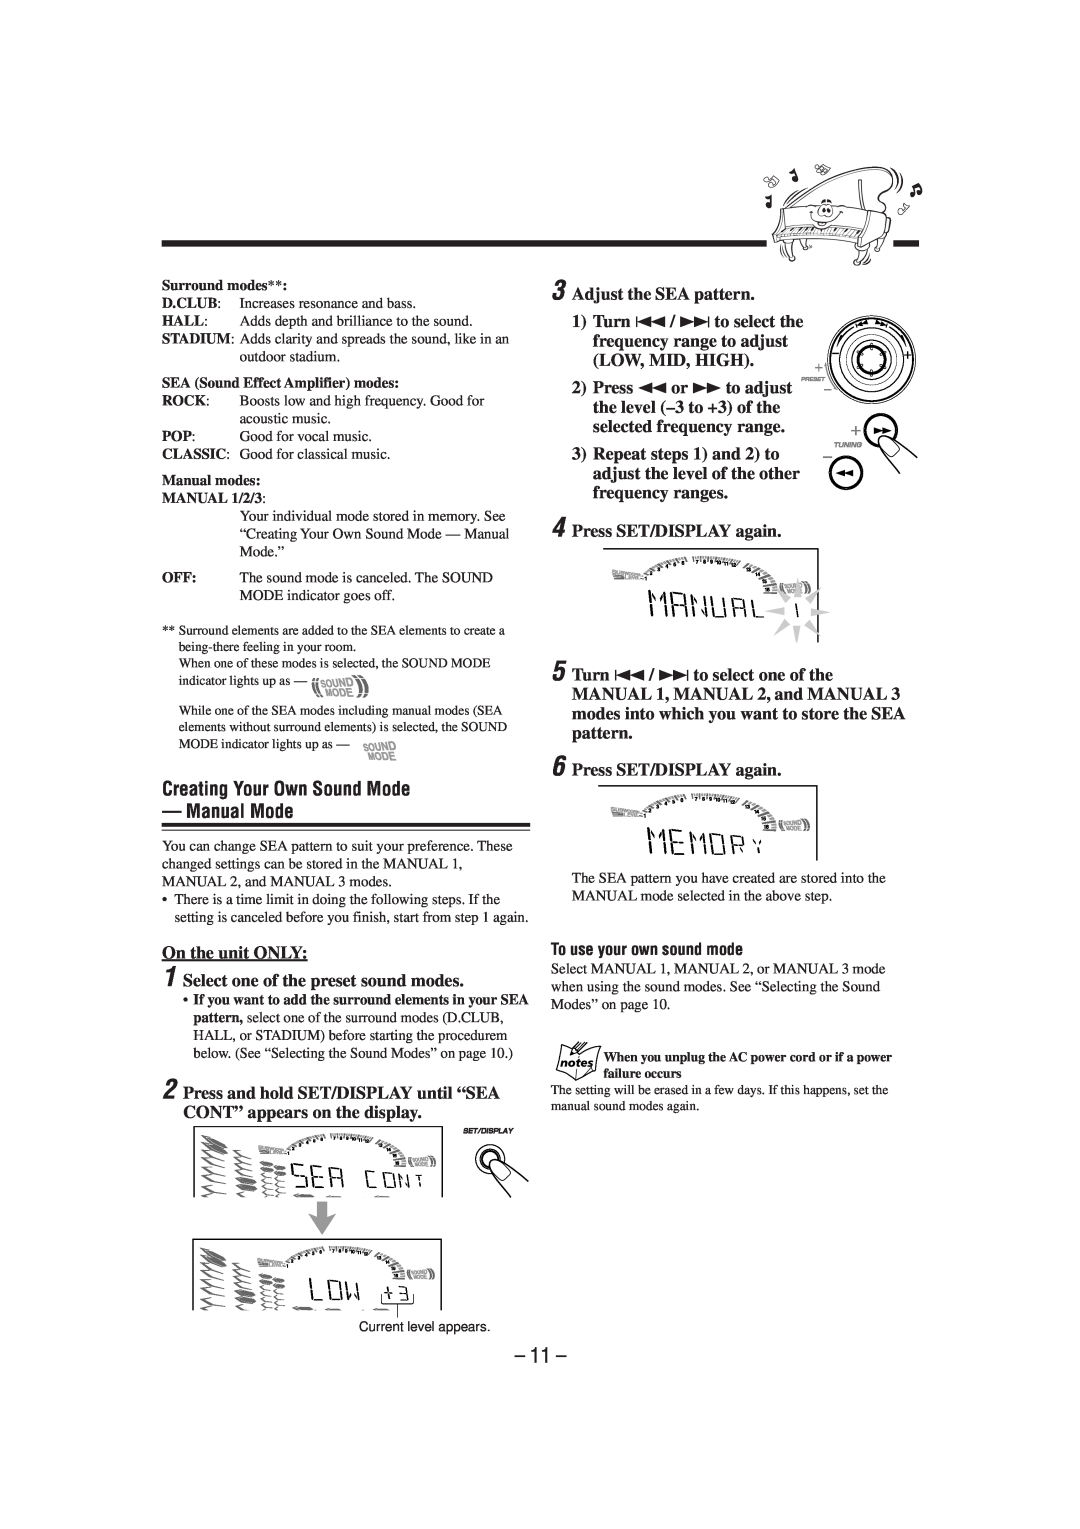 JVC GVT0052-008A manual Creating Your Own Sound Mode - Manual Mode 